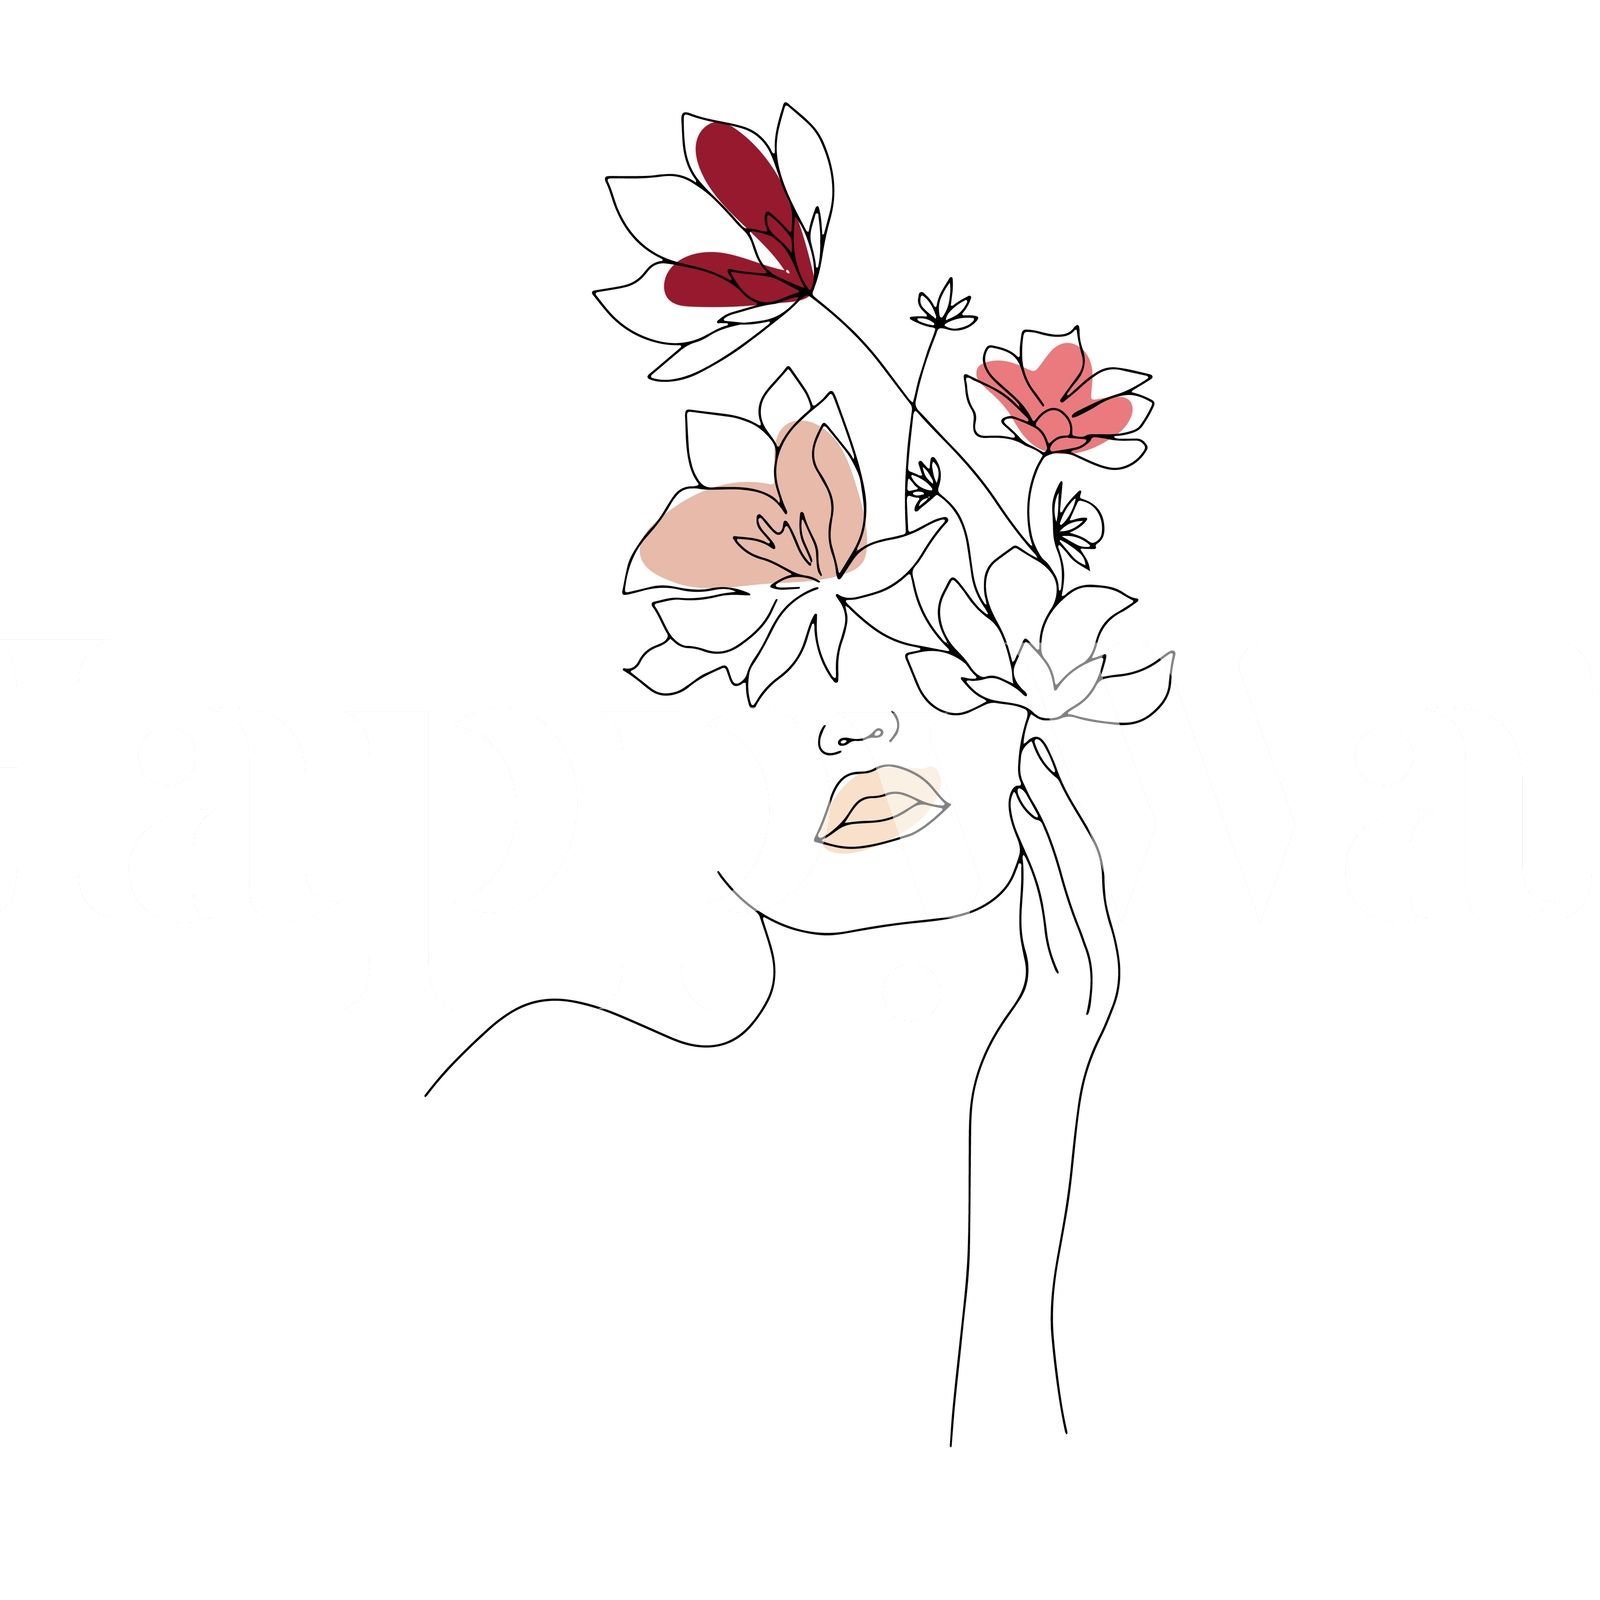 Buy Line Art Woman With Flowers 1 wallpaper US shipping at Happywall.com